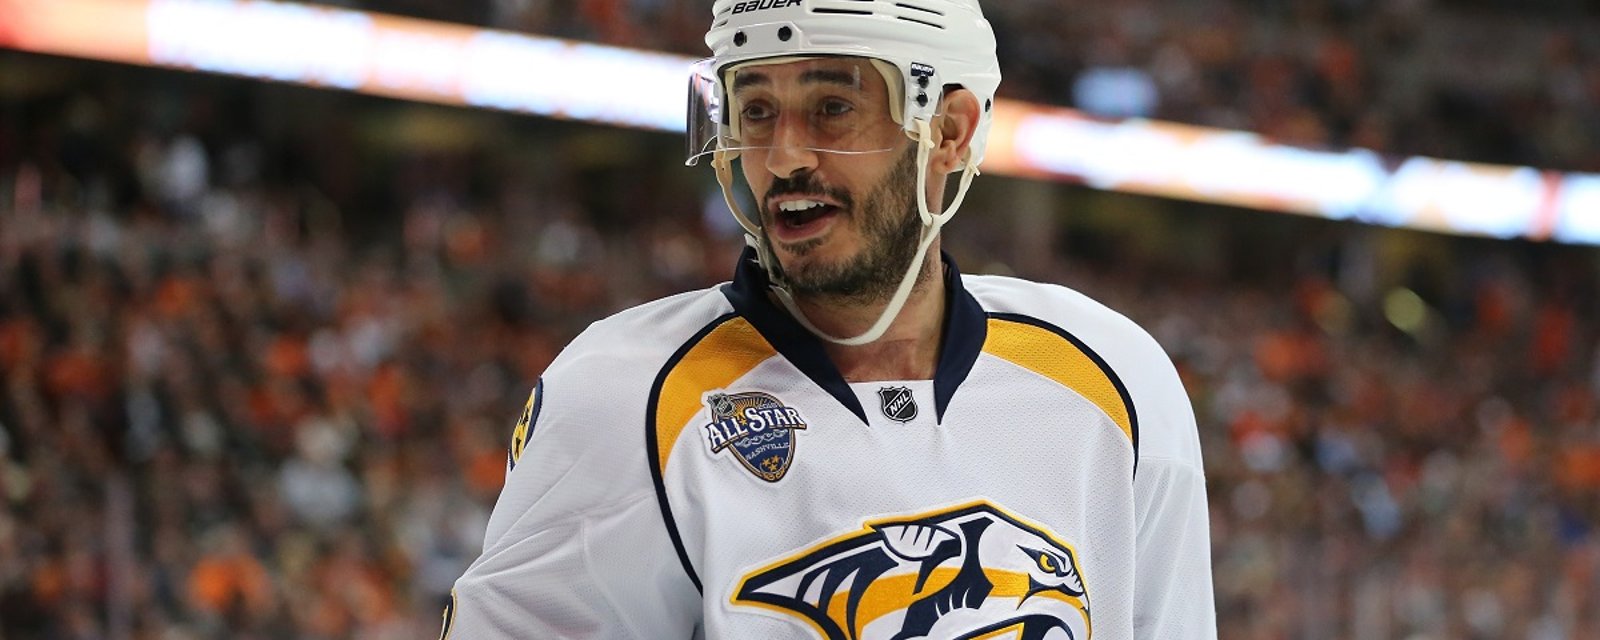 Former NHLer Mike Ribeiro facing 50 years in prison.